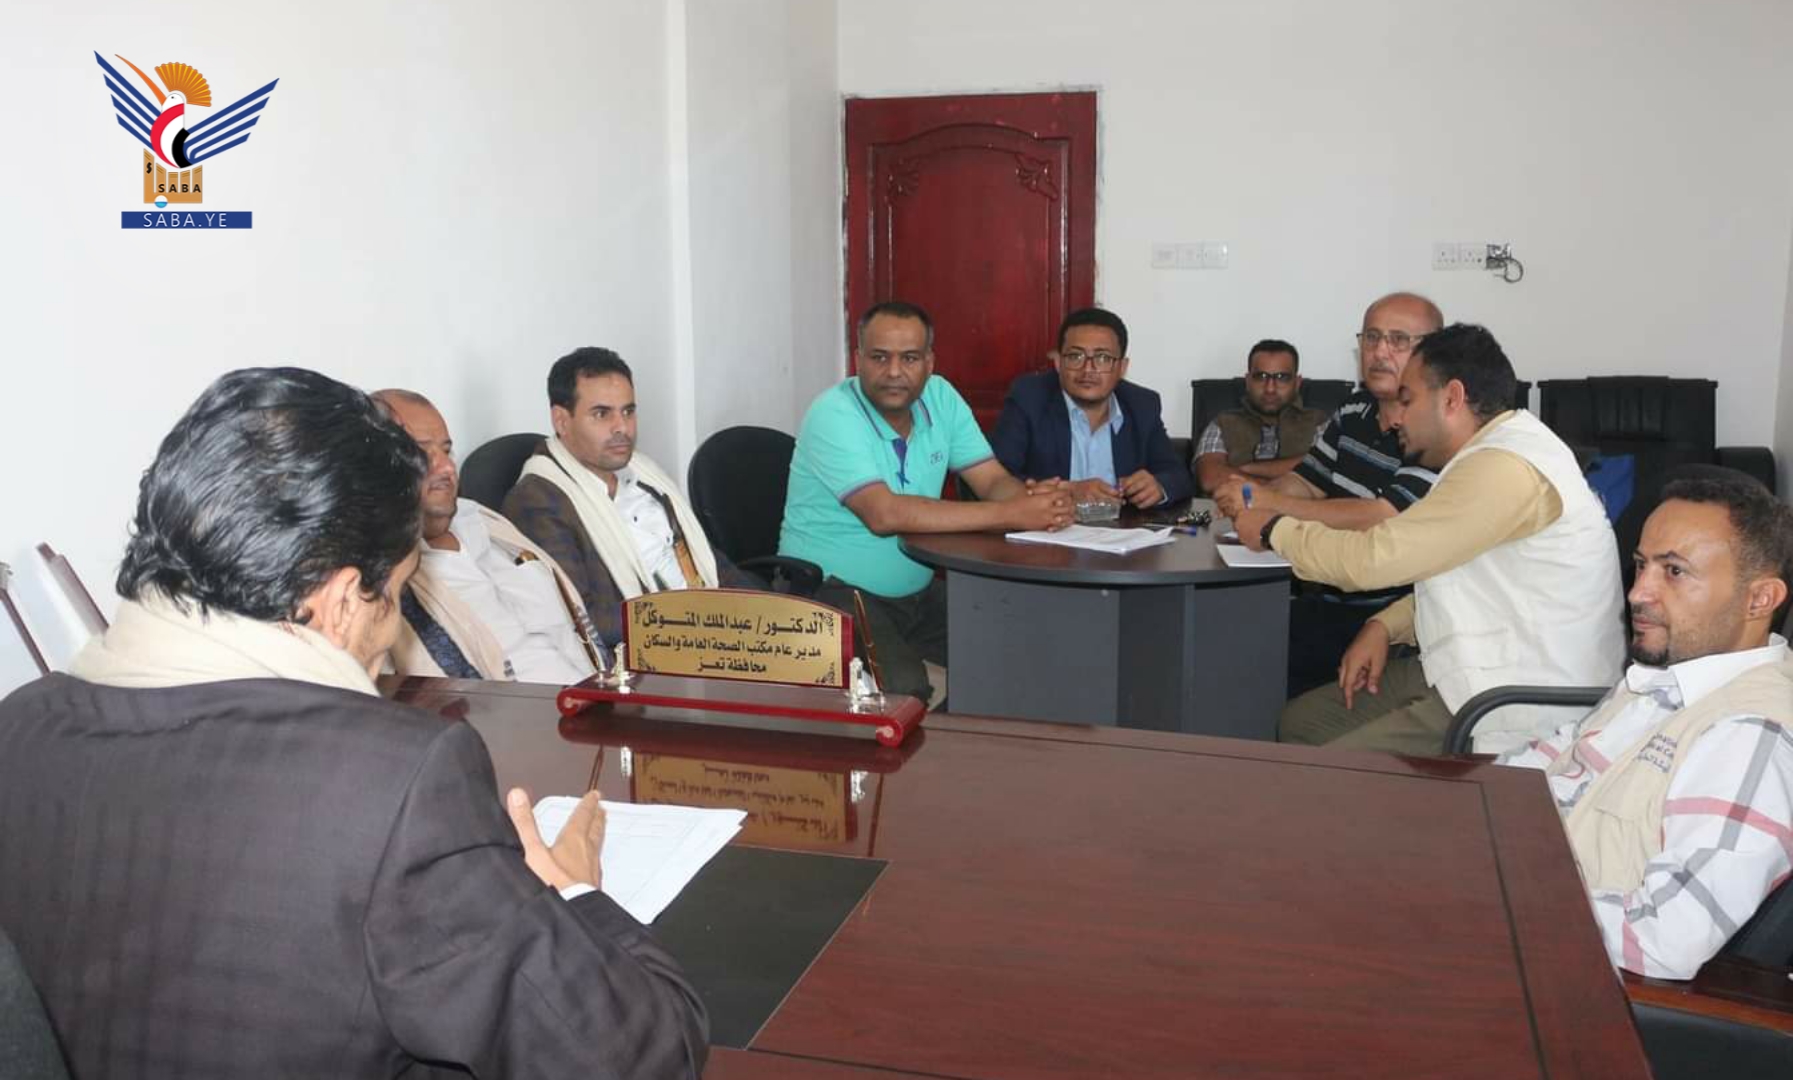 Discussing interventions of International Commission in health sector in Taiz